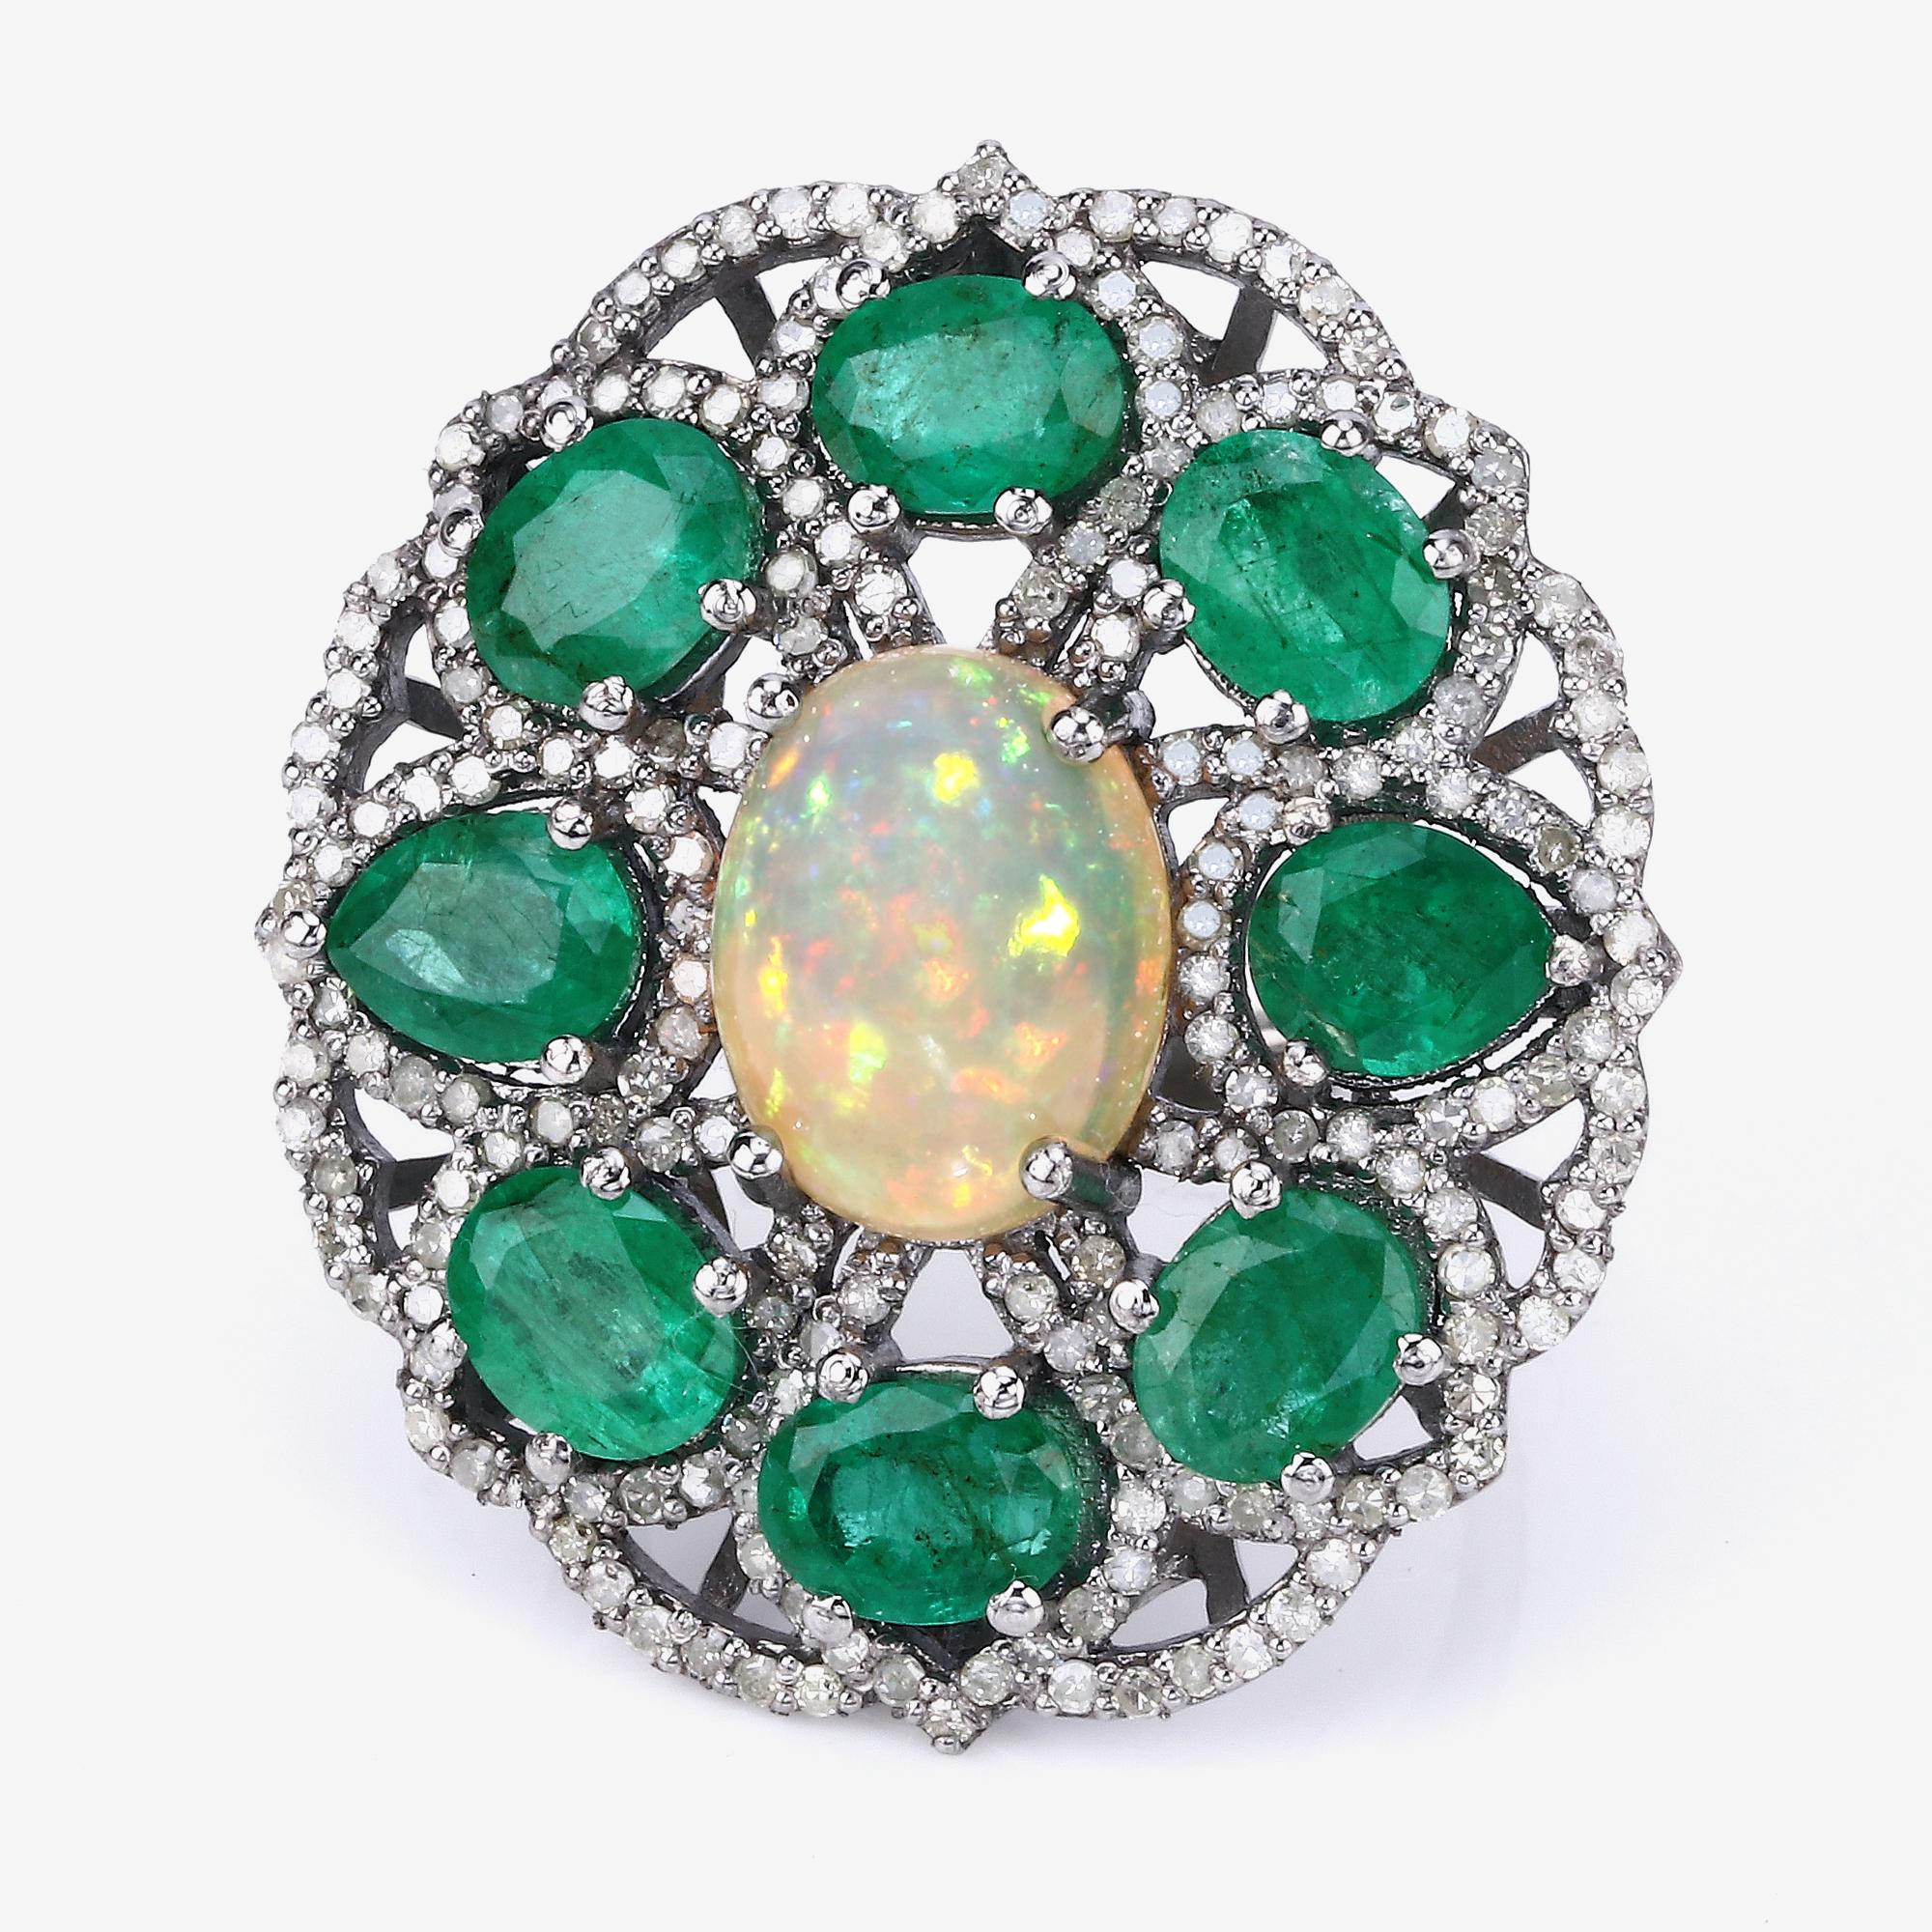 Oval Cut 9.80cttw Ethiopian Opal, Emerald with Diamonds 1.31cttw Sterling Silver Ring For Sale